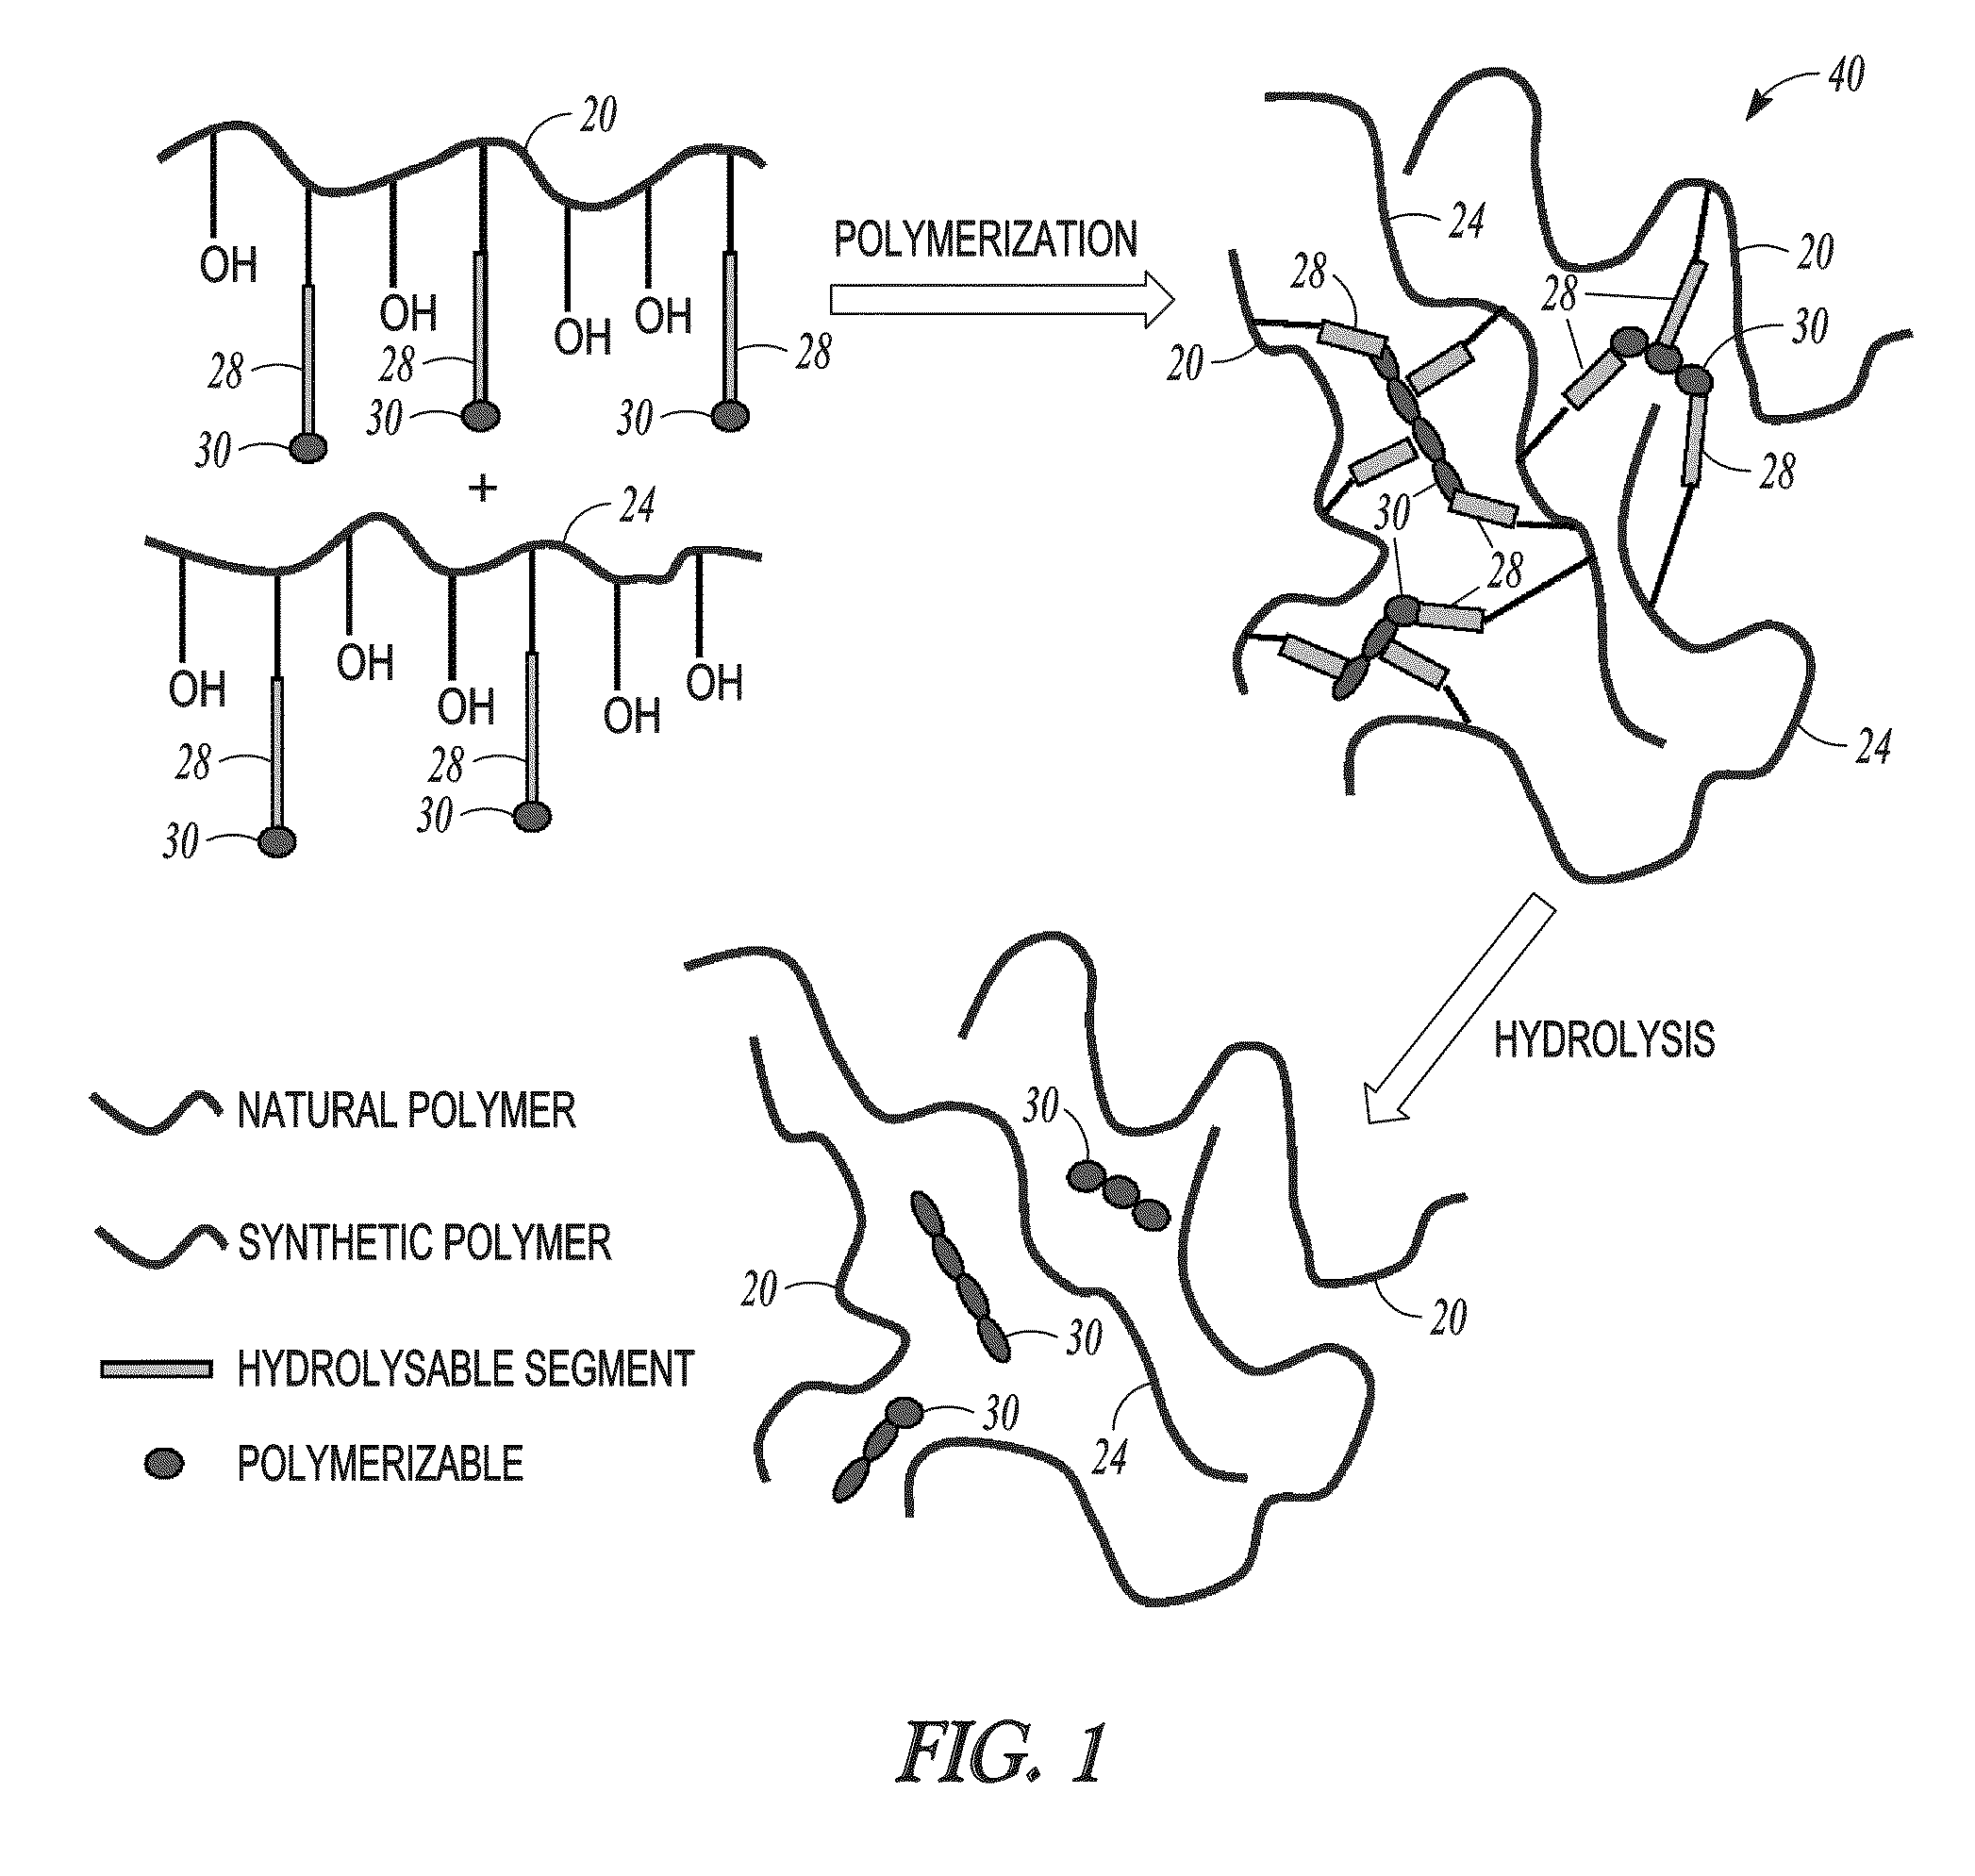 Hydrogel-forming composition comprising natural and synthetic segments